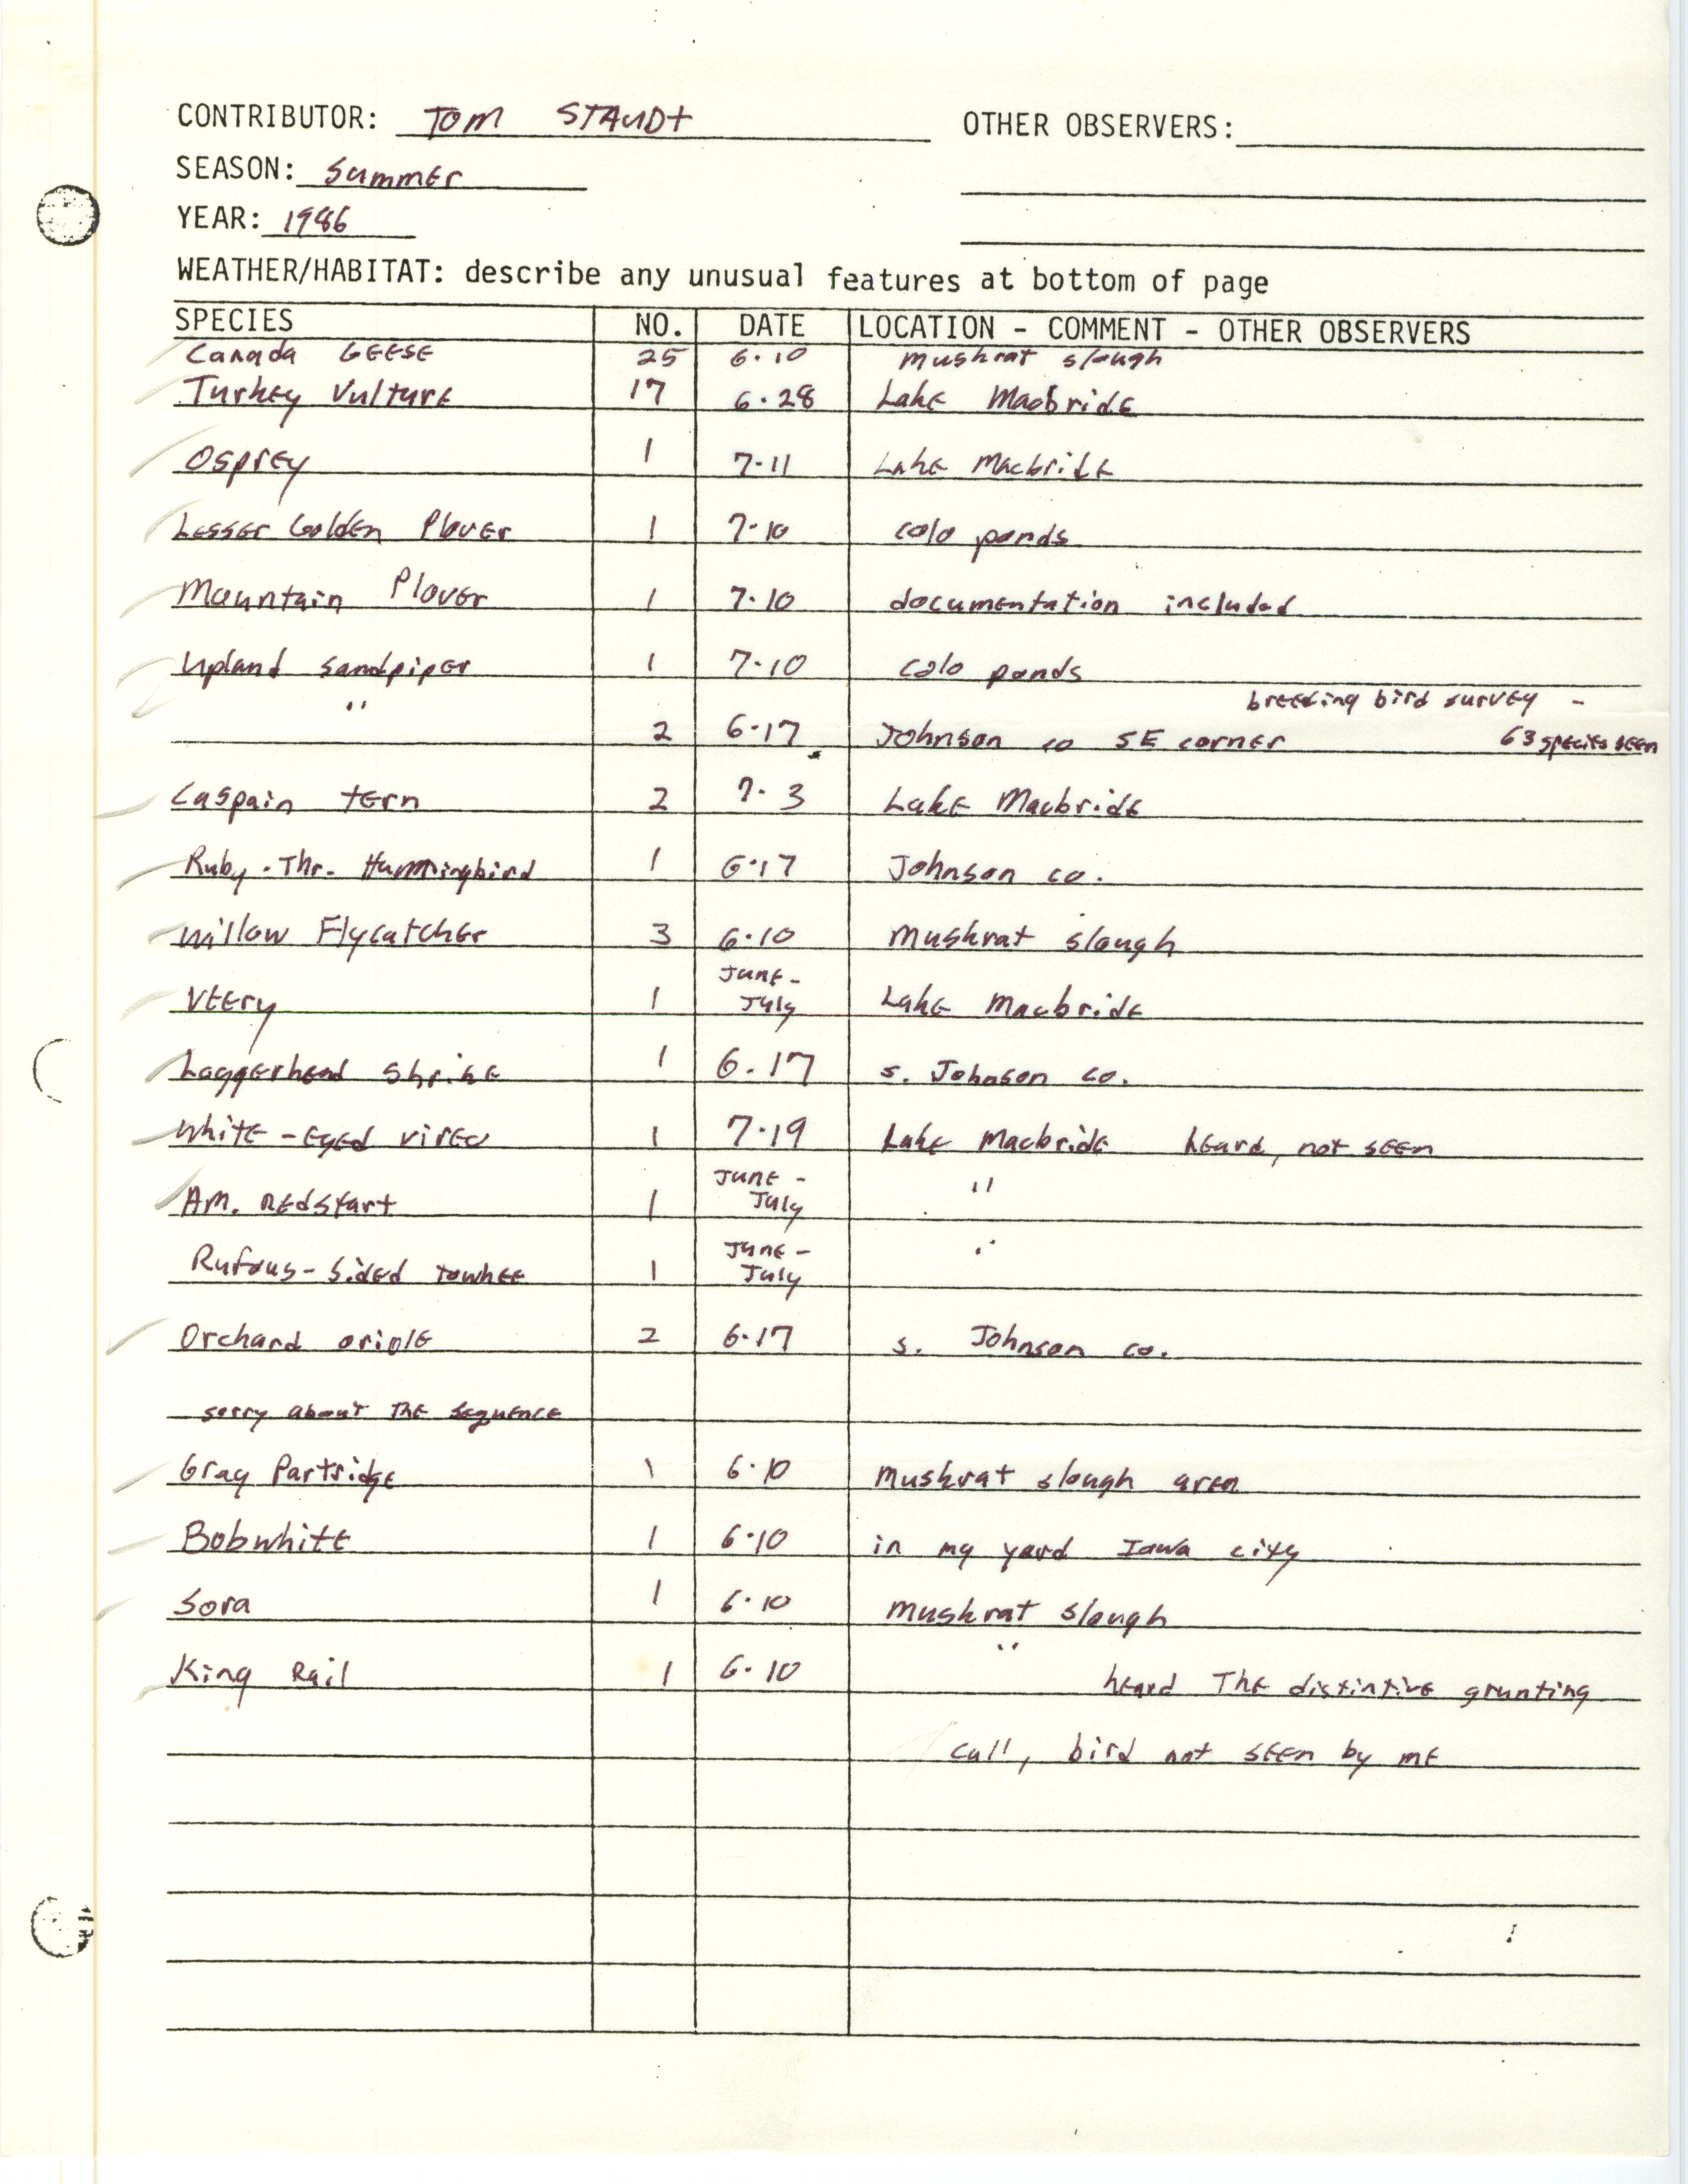 Field notes contributed by Thomas J. Staudt, summer 1986